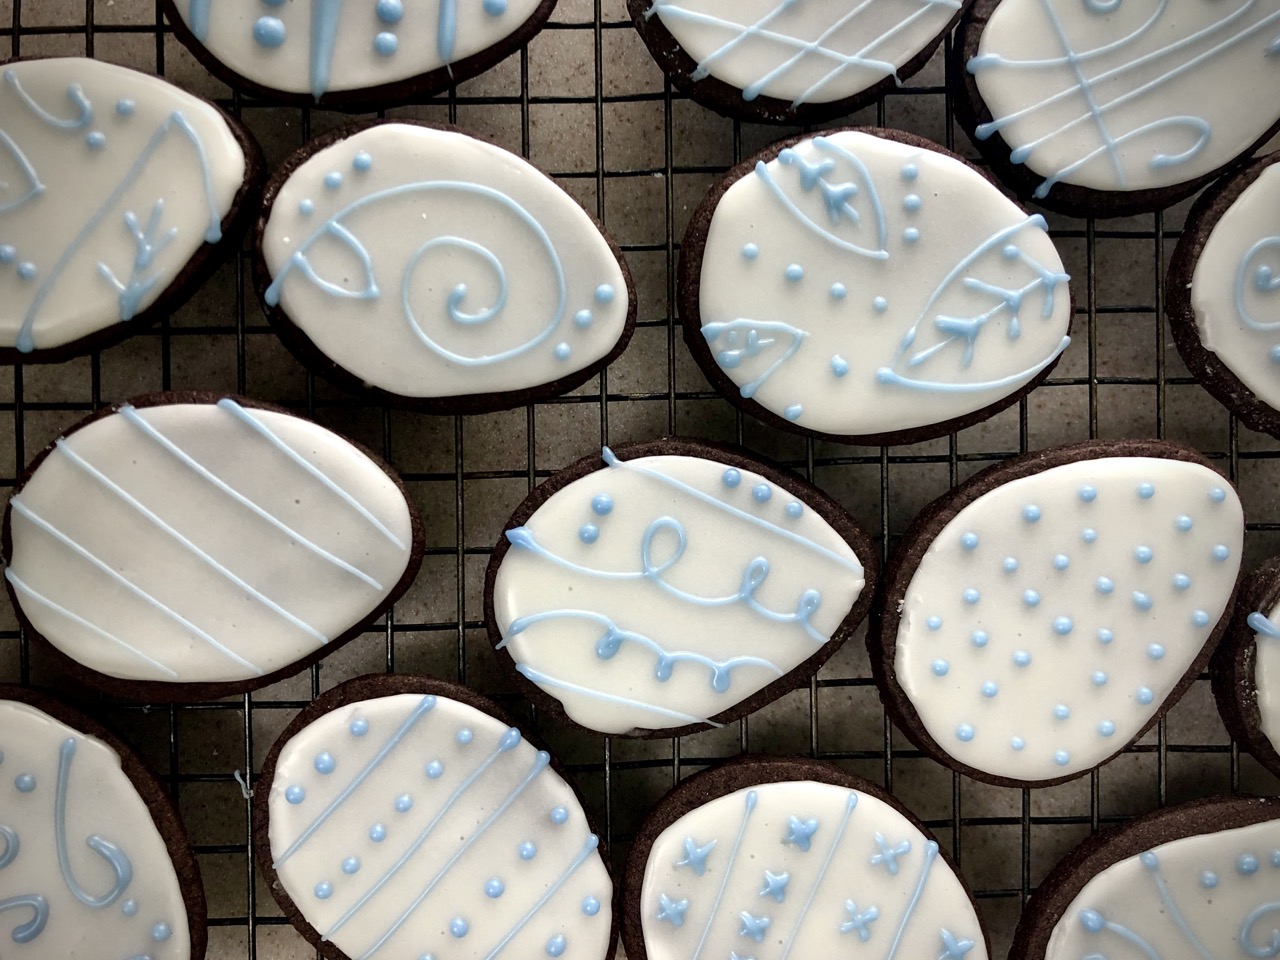 How to Decorate Sugar Cookies